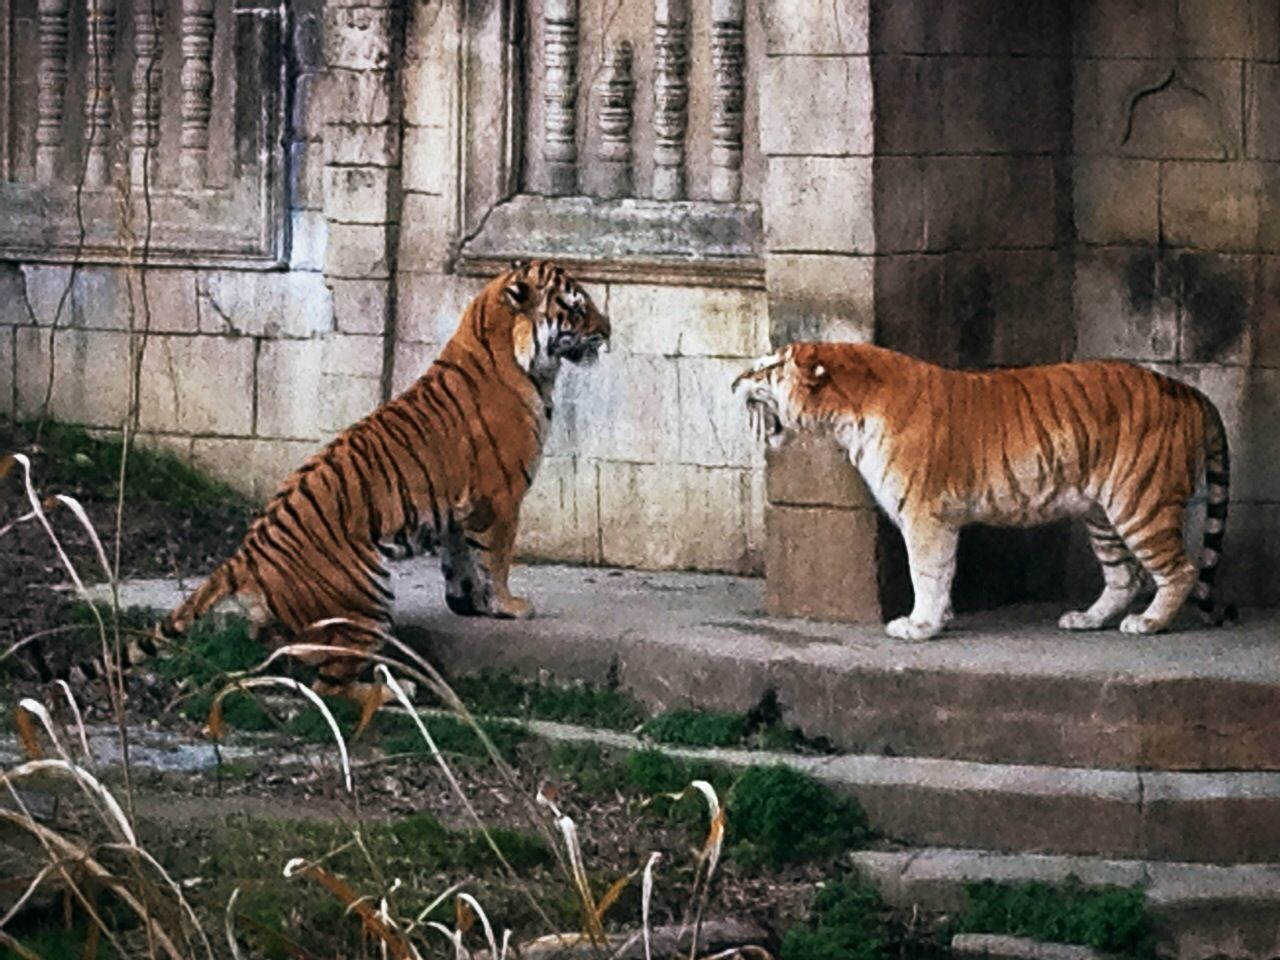 Tigers face to face